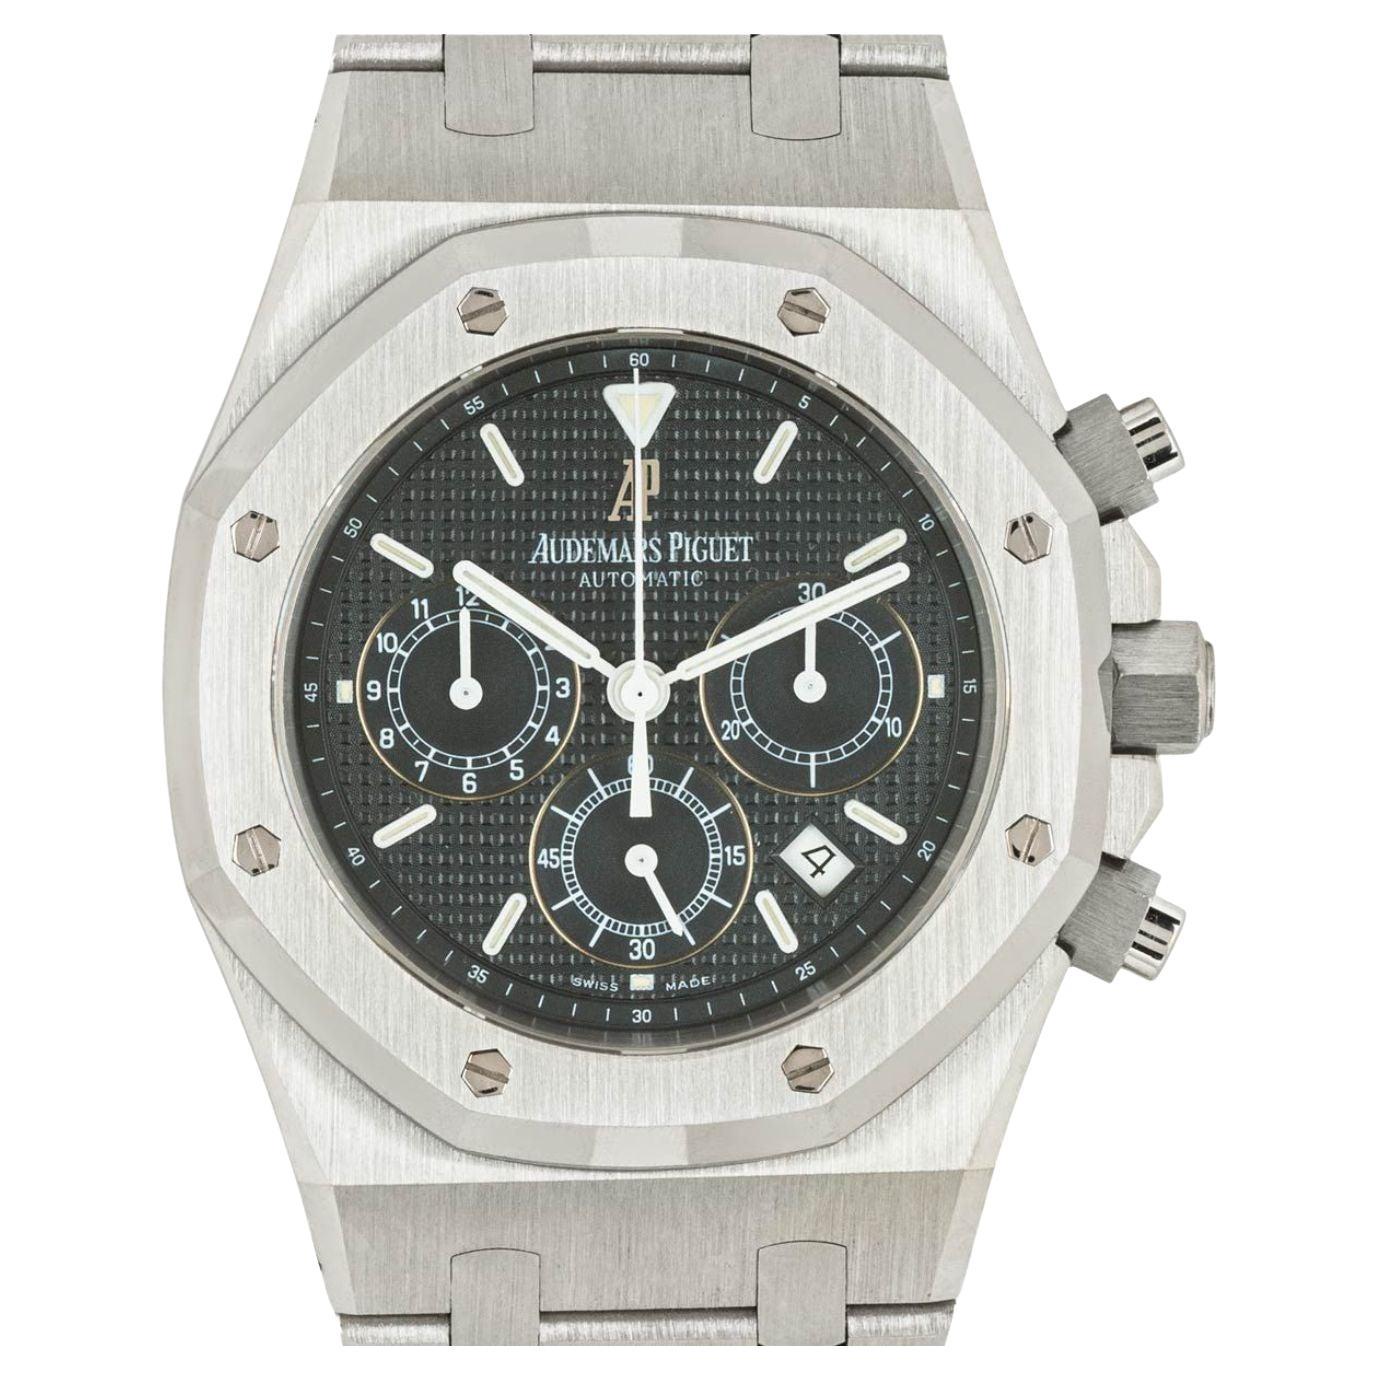 A stainless steel Royal Oak by Audemars Piguet. Features a blue dial with a 